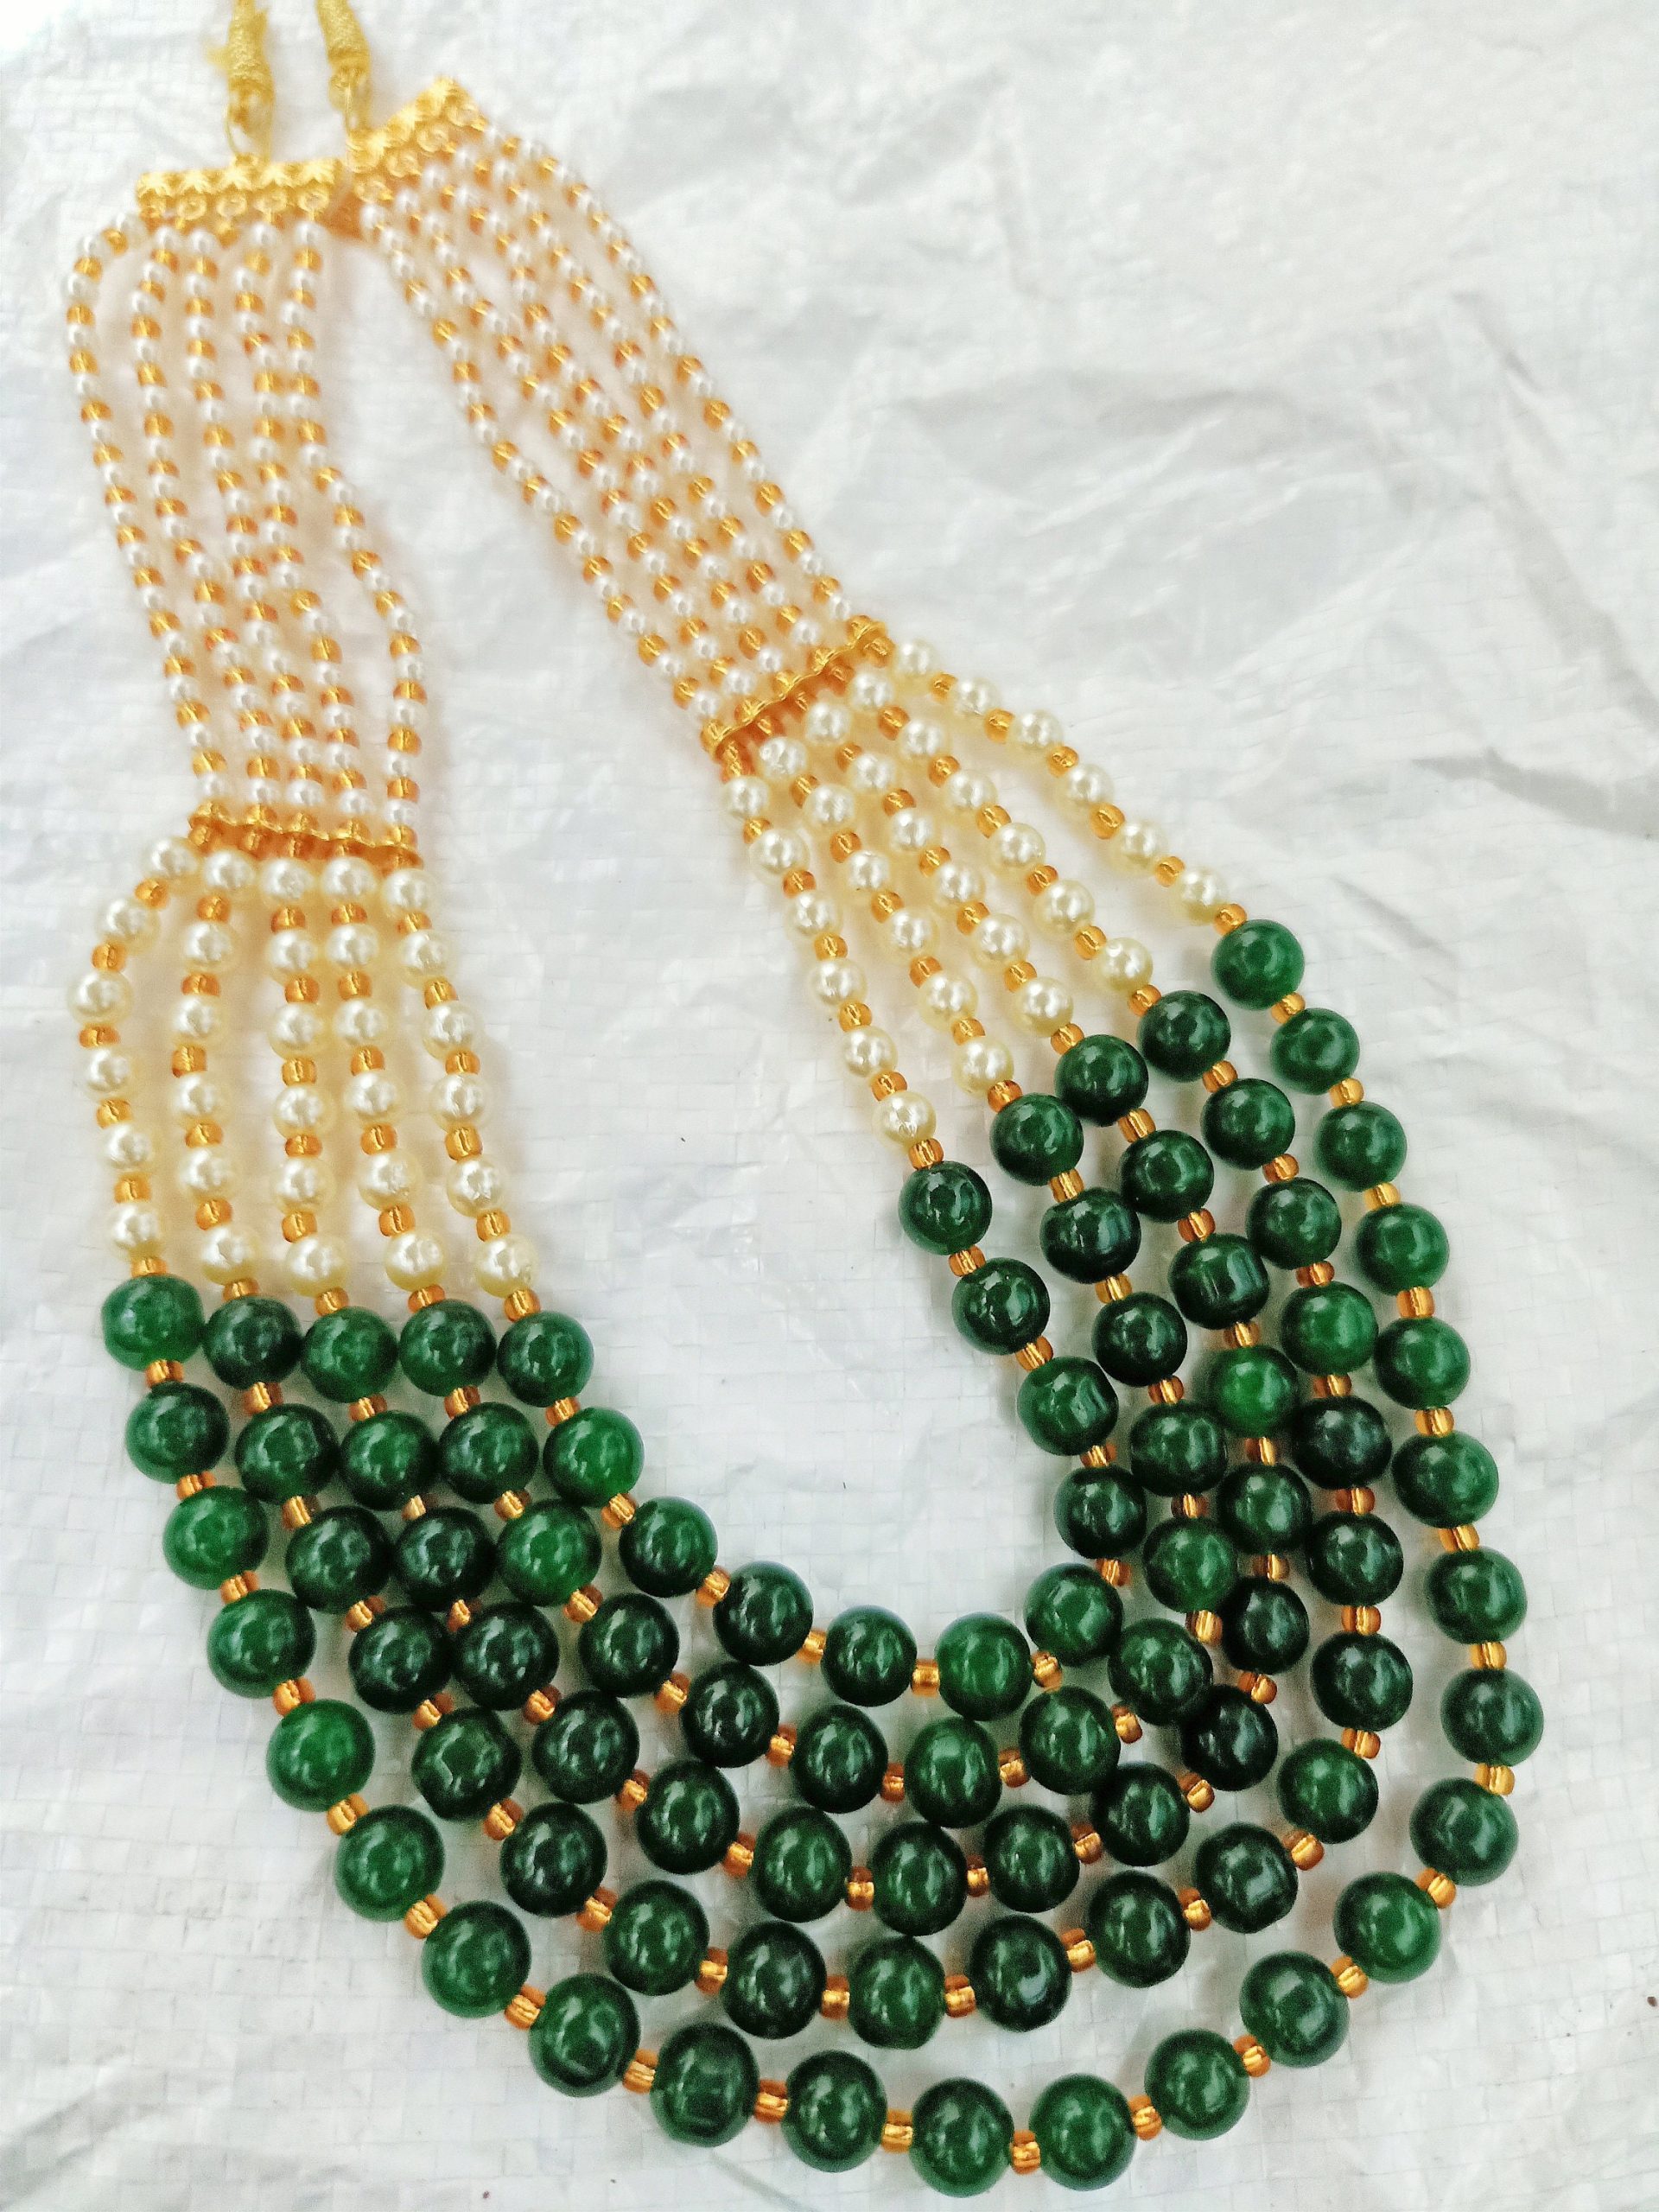 Vintage Pearl Beads Necklace With Green Moti Mala Strand 5 Line India | Save 33% - Rajasthan Living 16